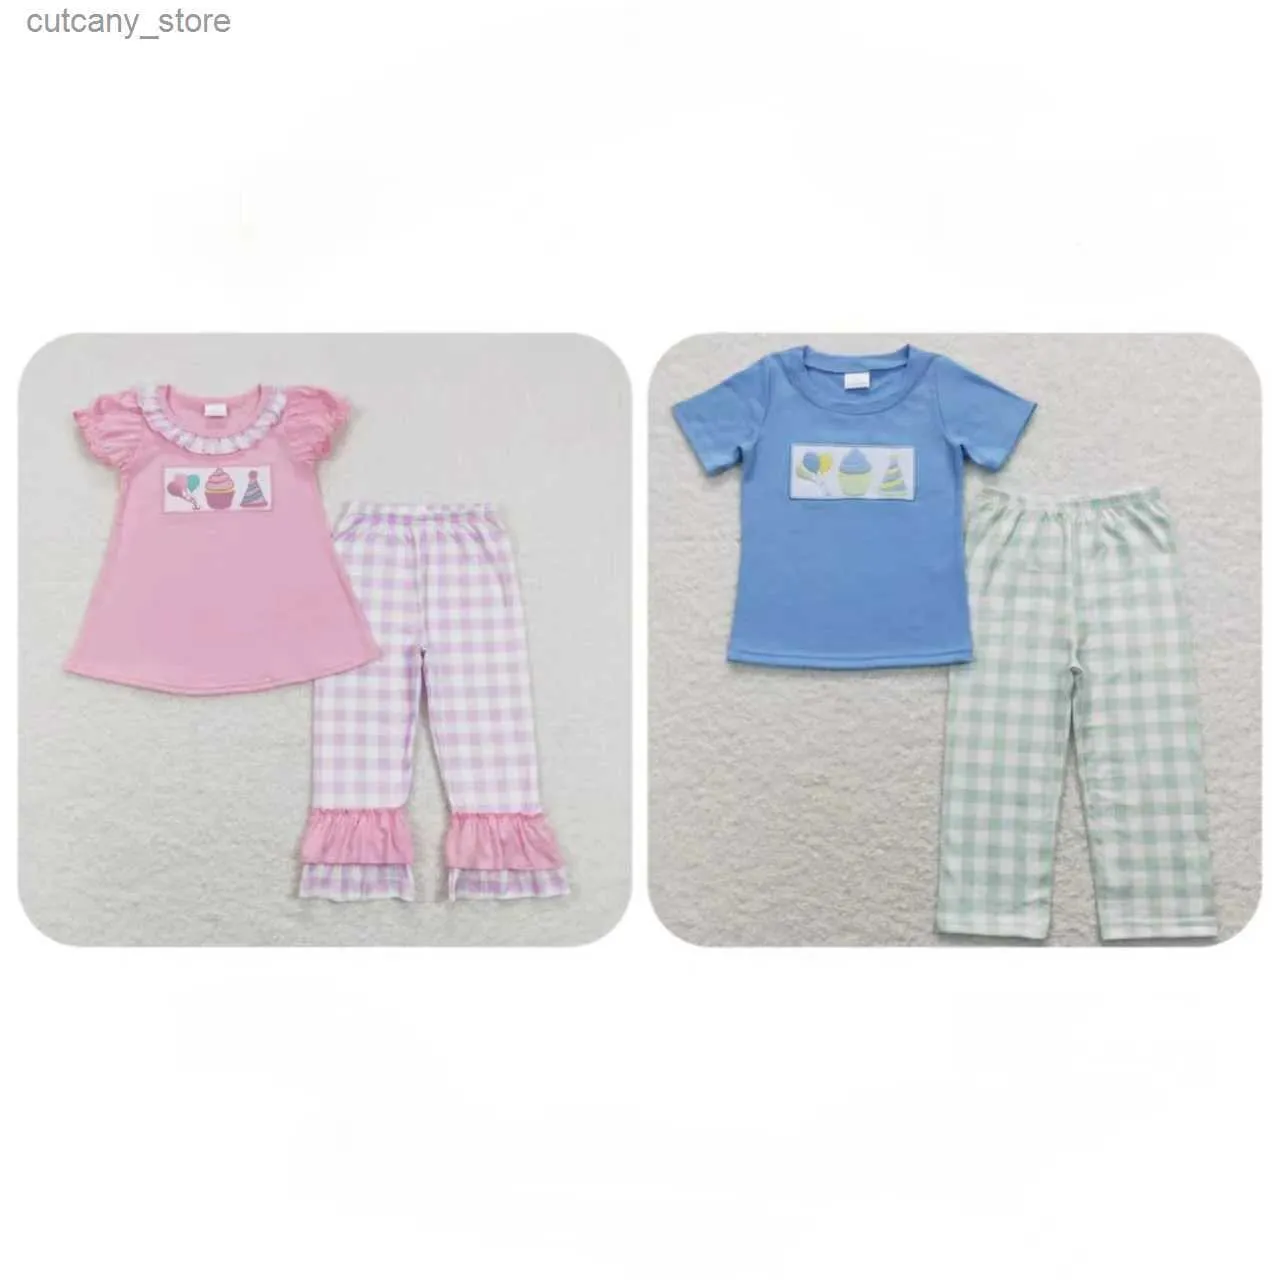 T-shirts Infant Kids Birthday Sleepwear Outfit Toddler Short Sleeves Embroidery Shirt Tops Children Plaid Pants Baby Boy Girl Set Pajamas L240312